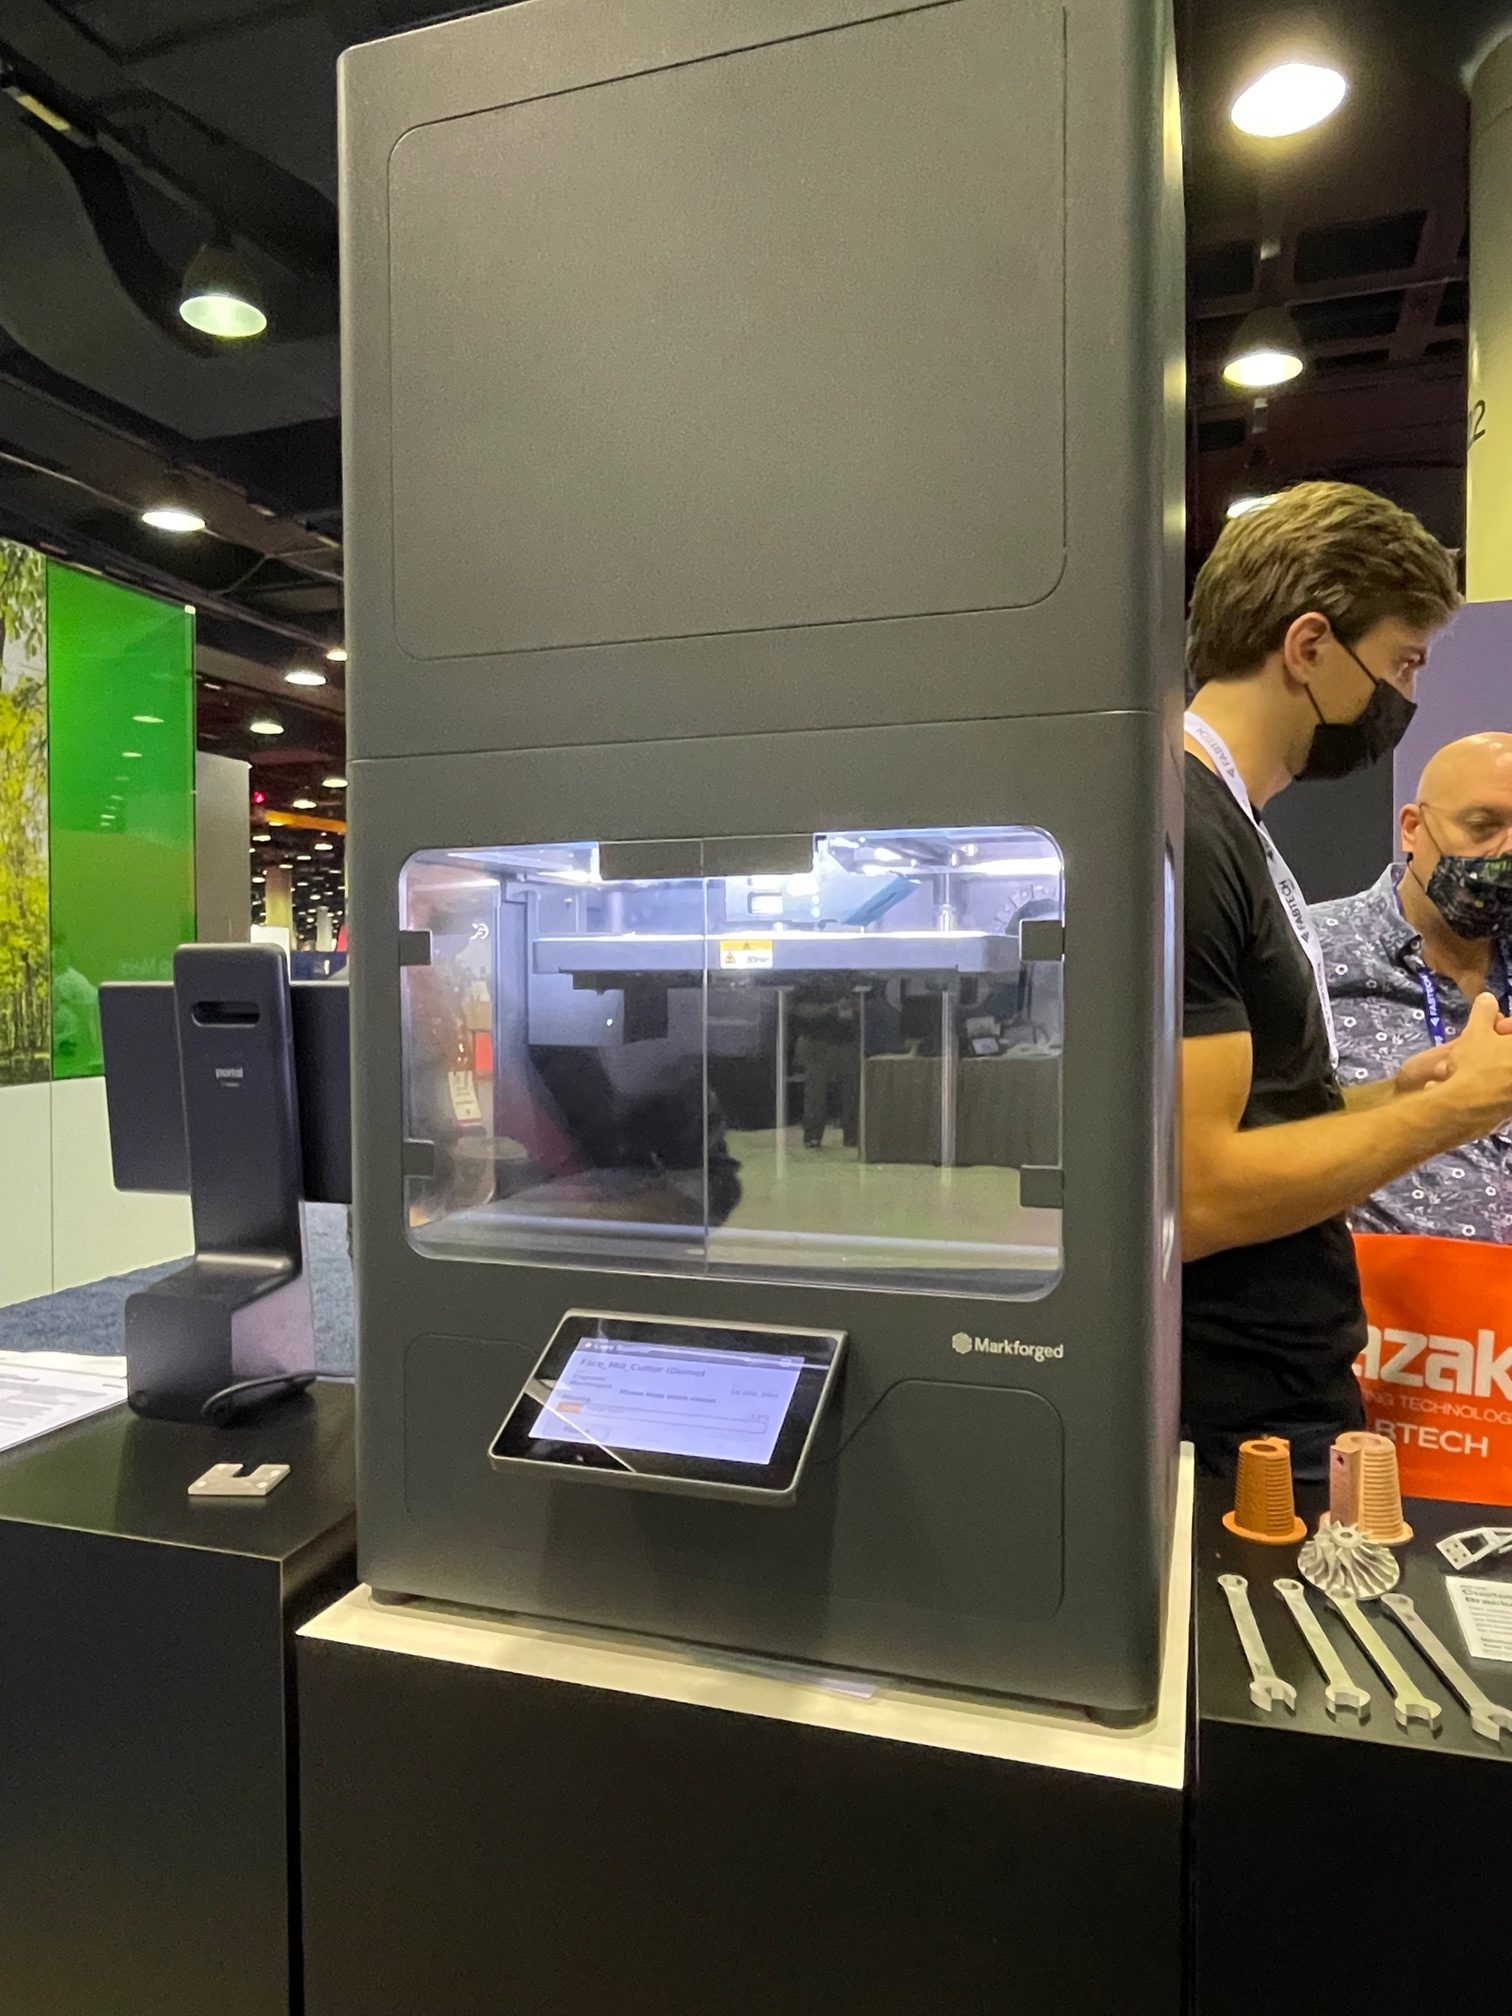 Markforged booth at RAPID + TCT 2021 in Chicago.